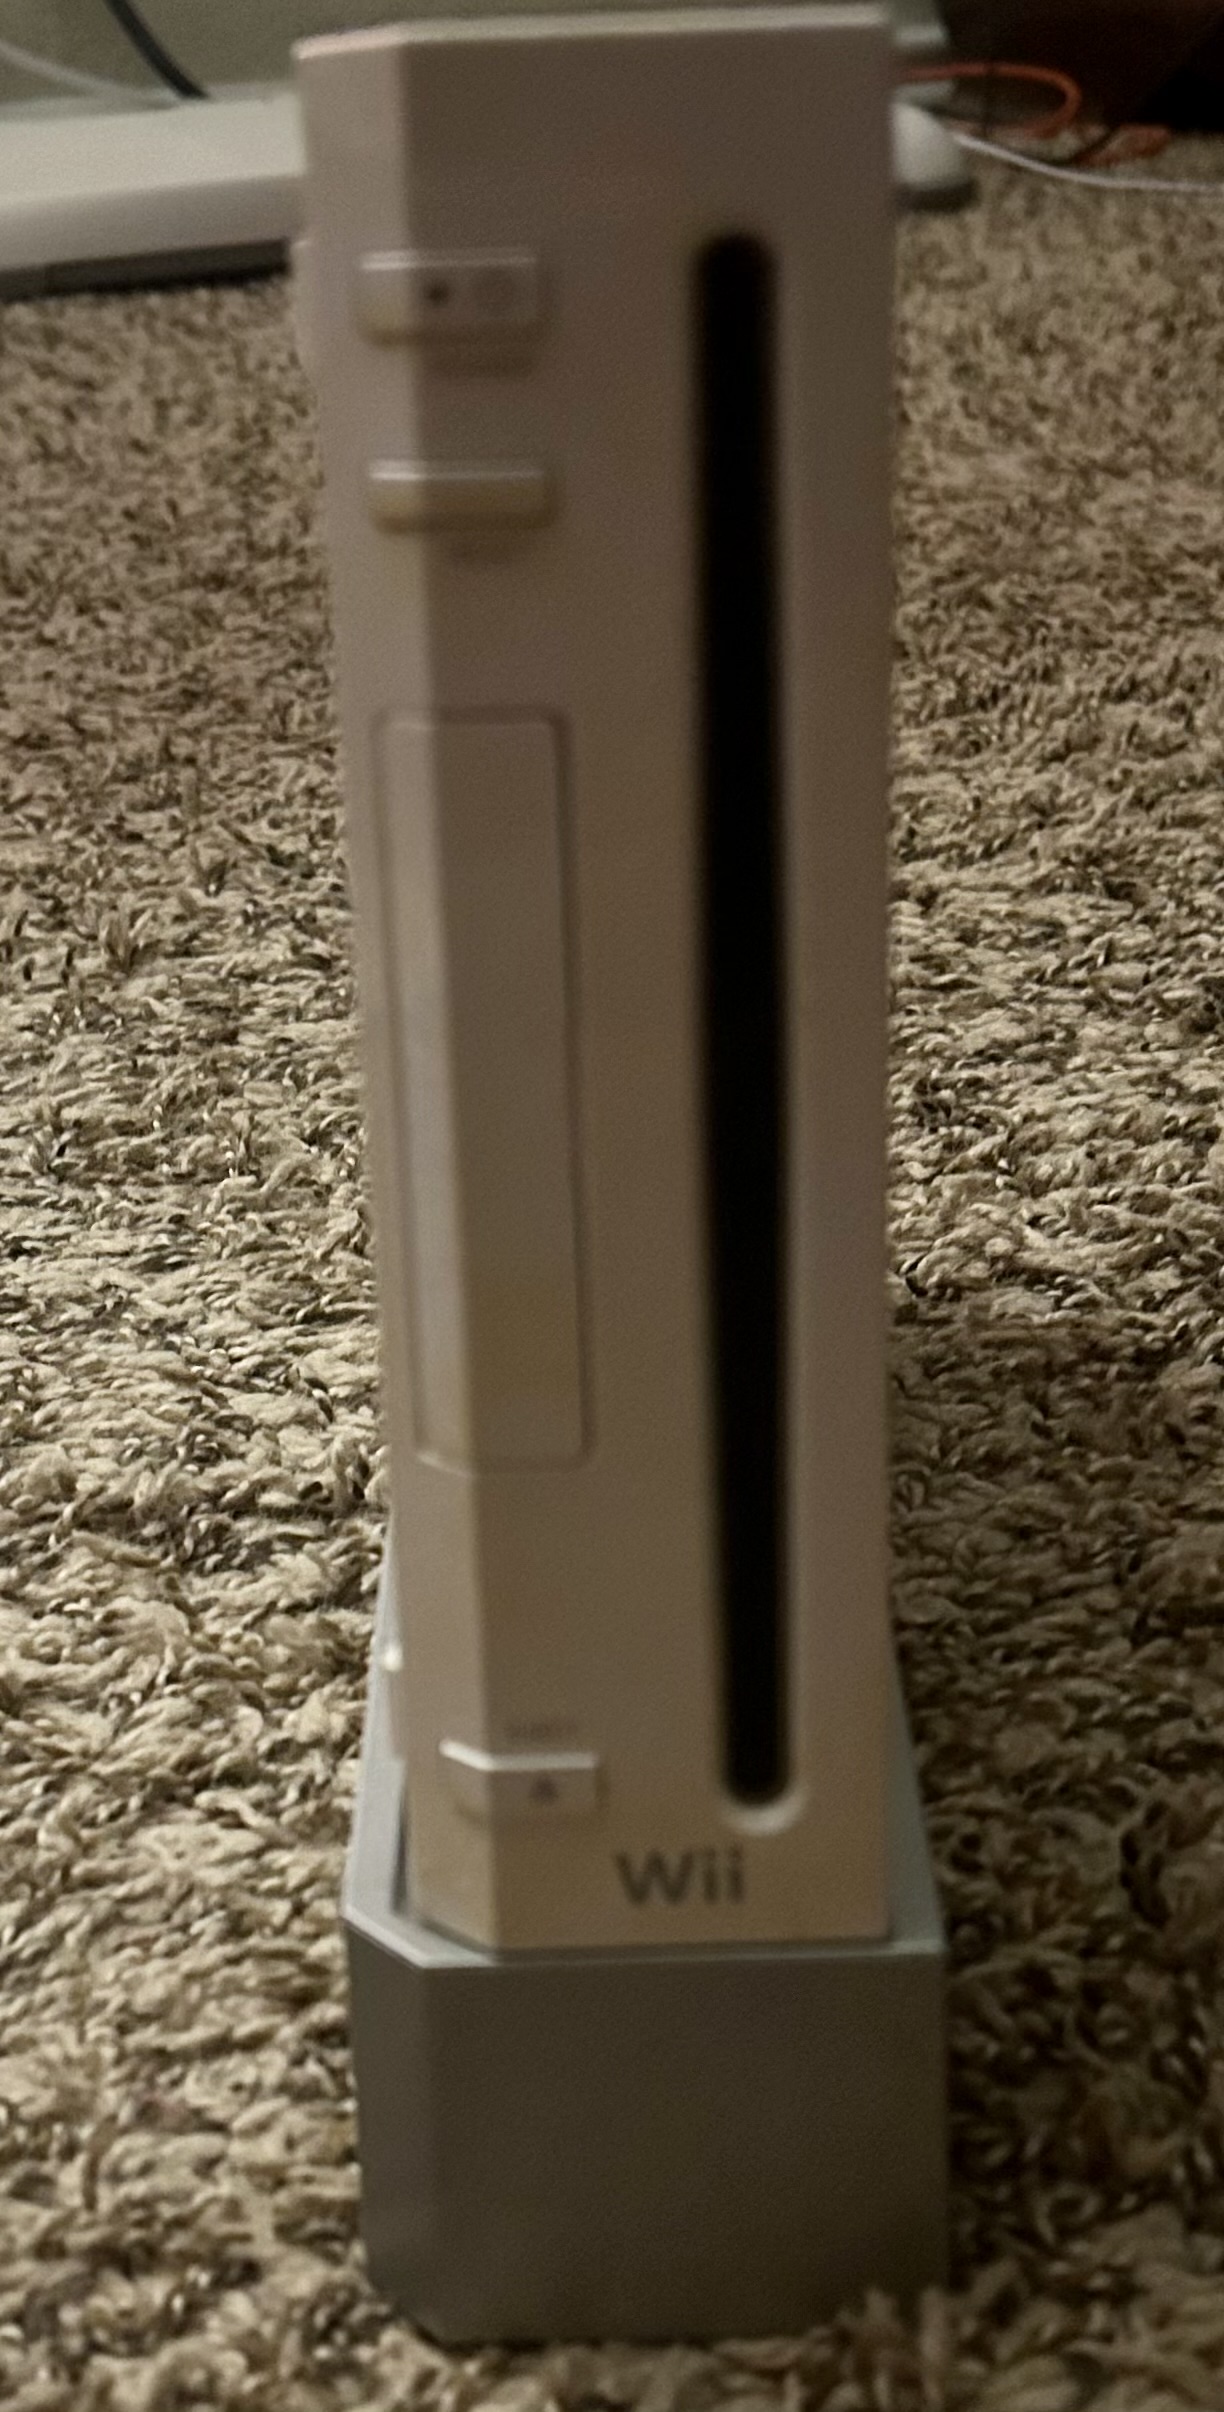 Wii Front View